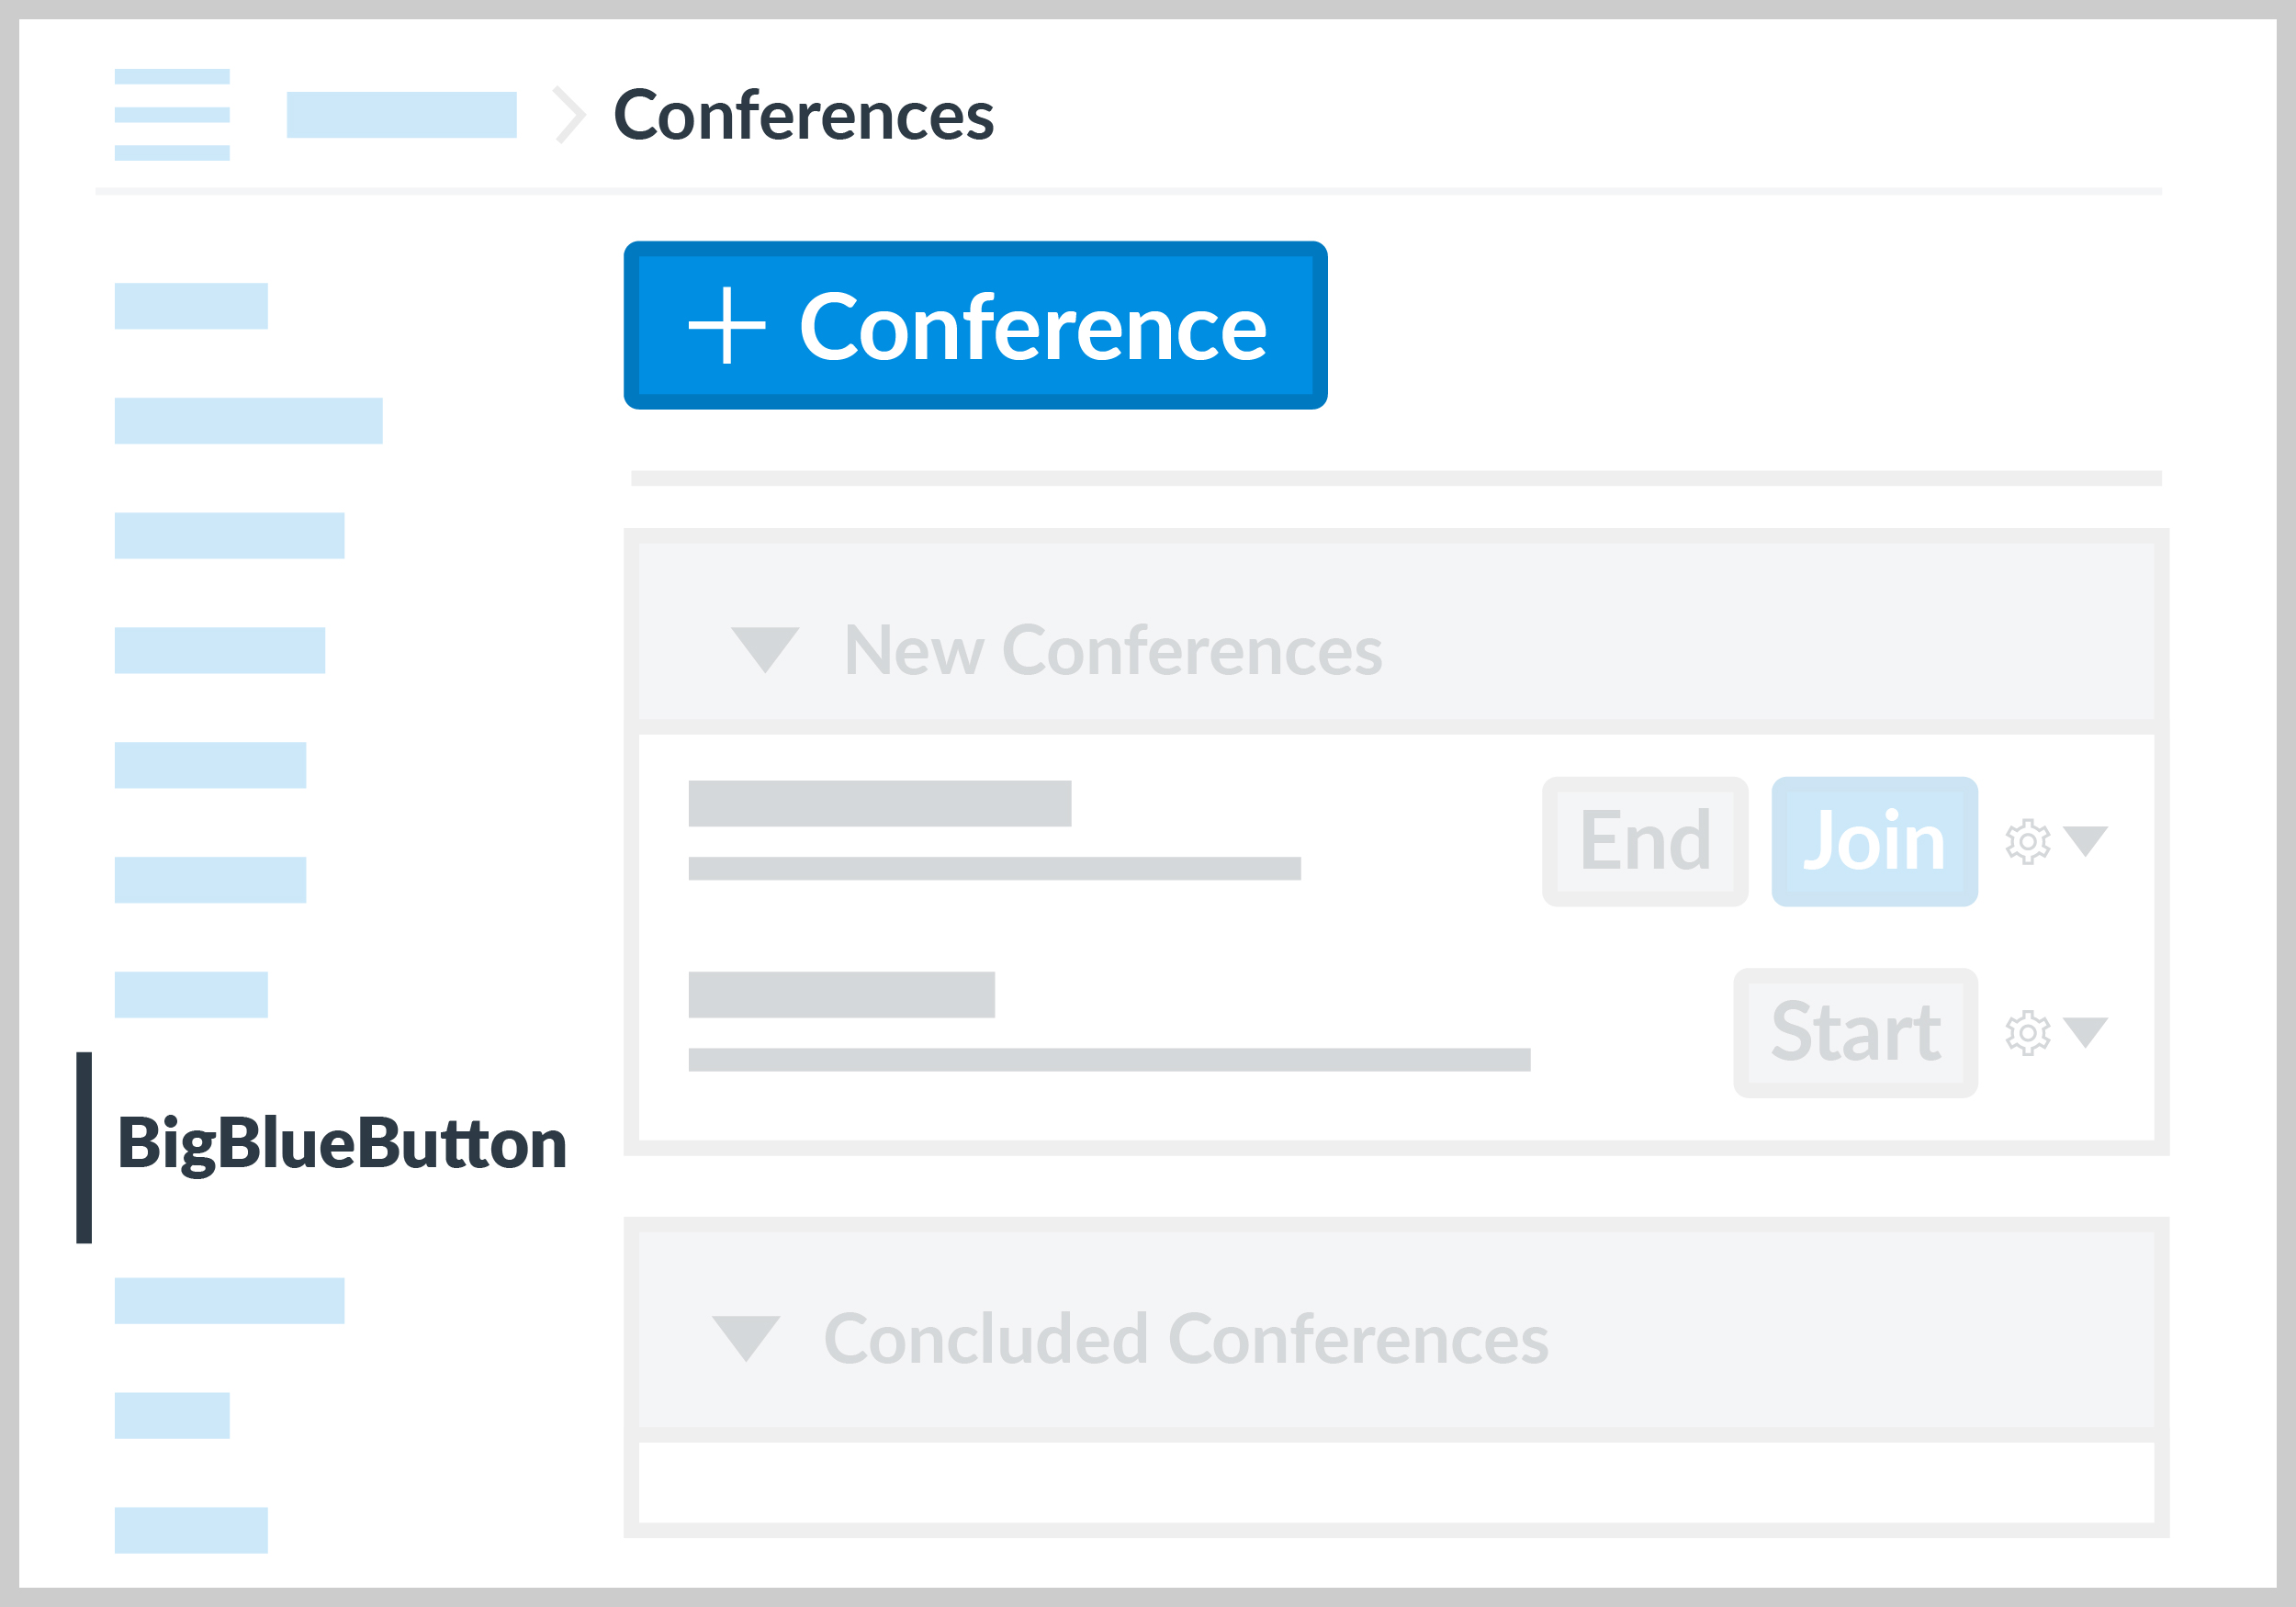 Creates Conferences from Canvas course site.